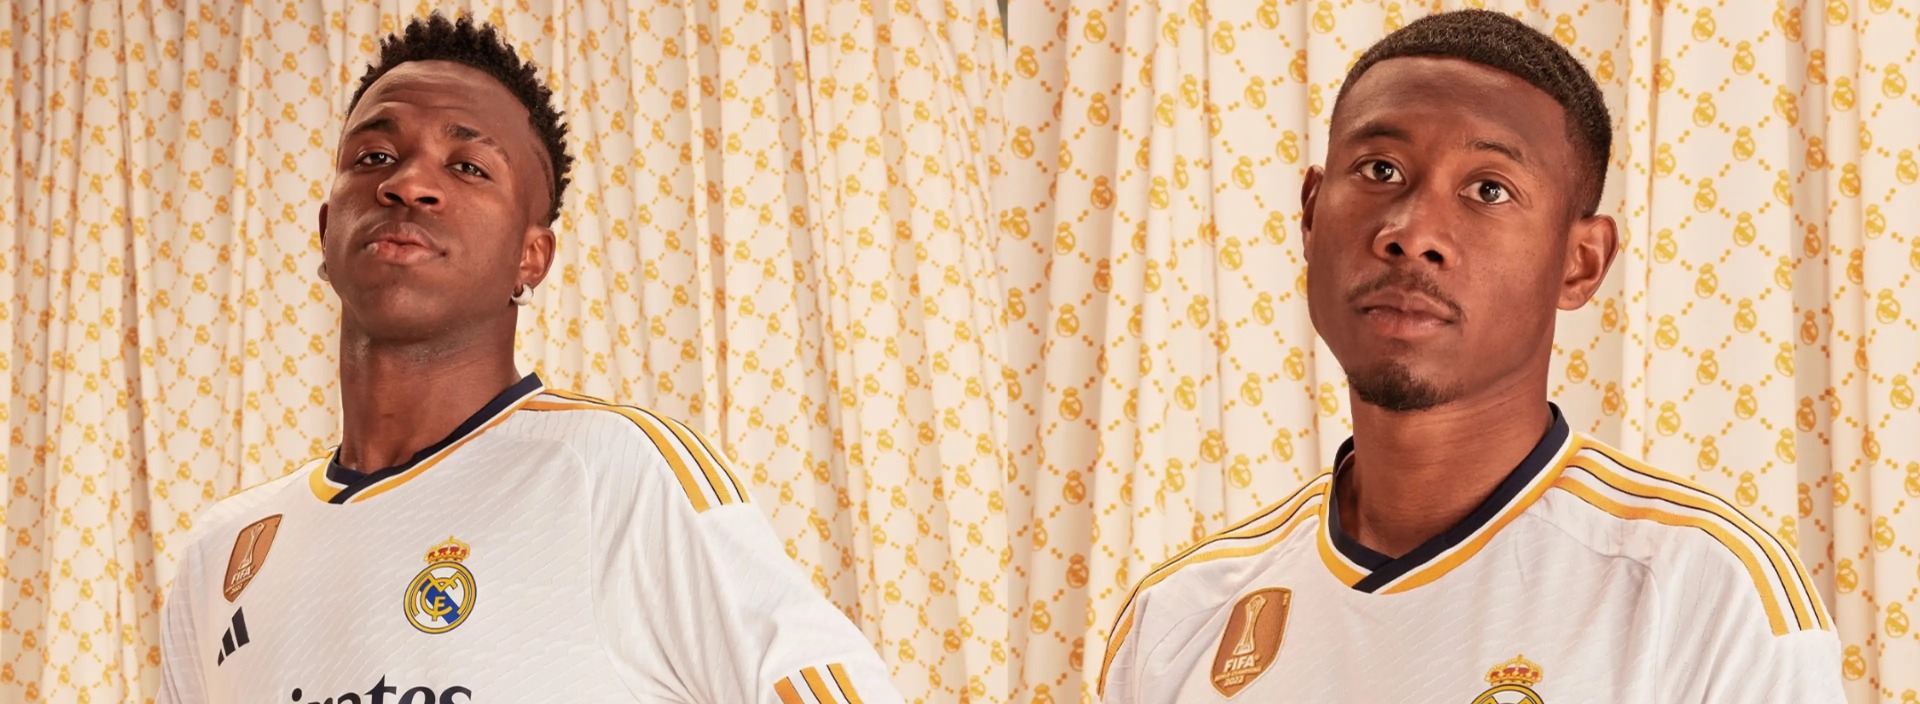 The World's Most Coveted Football Shirts: Real Madrid Takes the Top Spot